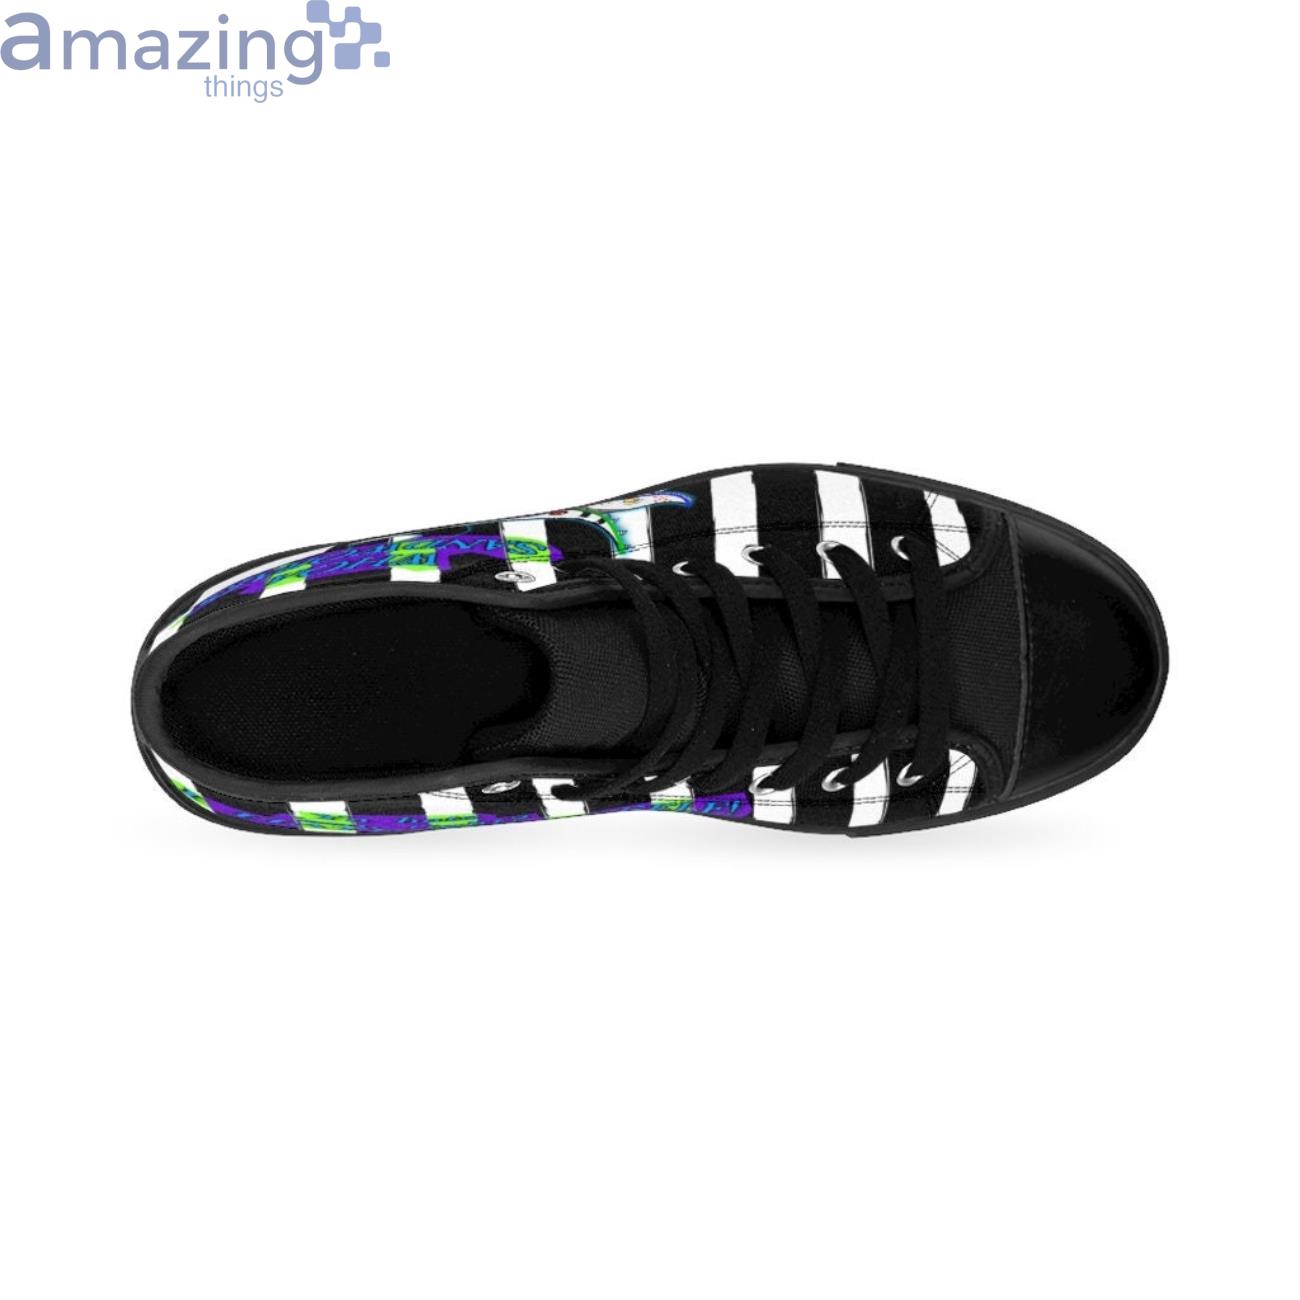 Whoa Sandworms Beetlejuice High Top Shoes Product Photo 2